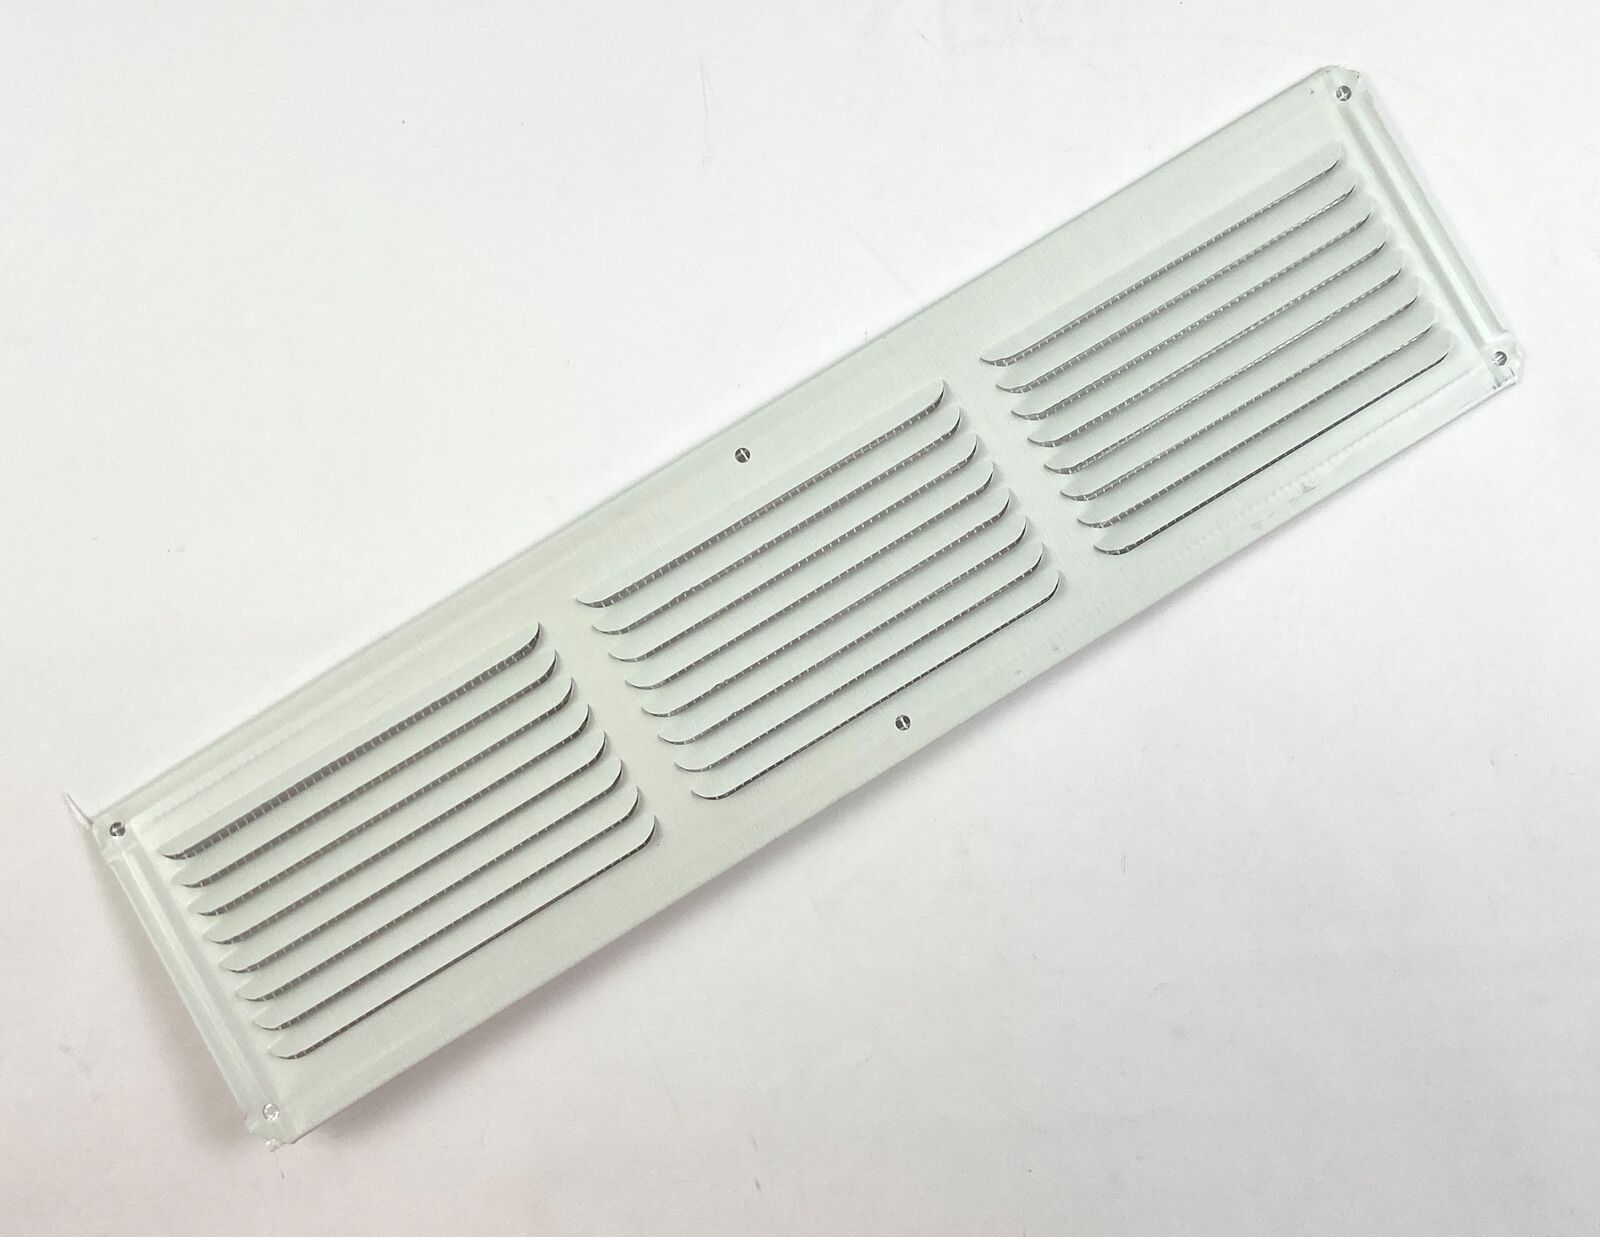 GAF Undereave Intake Vents Aluminum White 16 x 4 in 36-Pack EAC16X4W